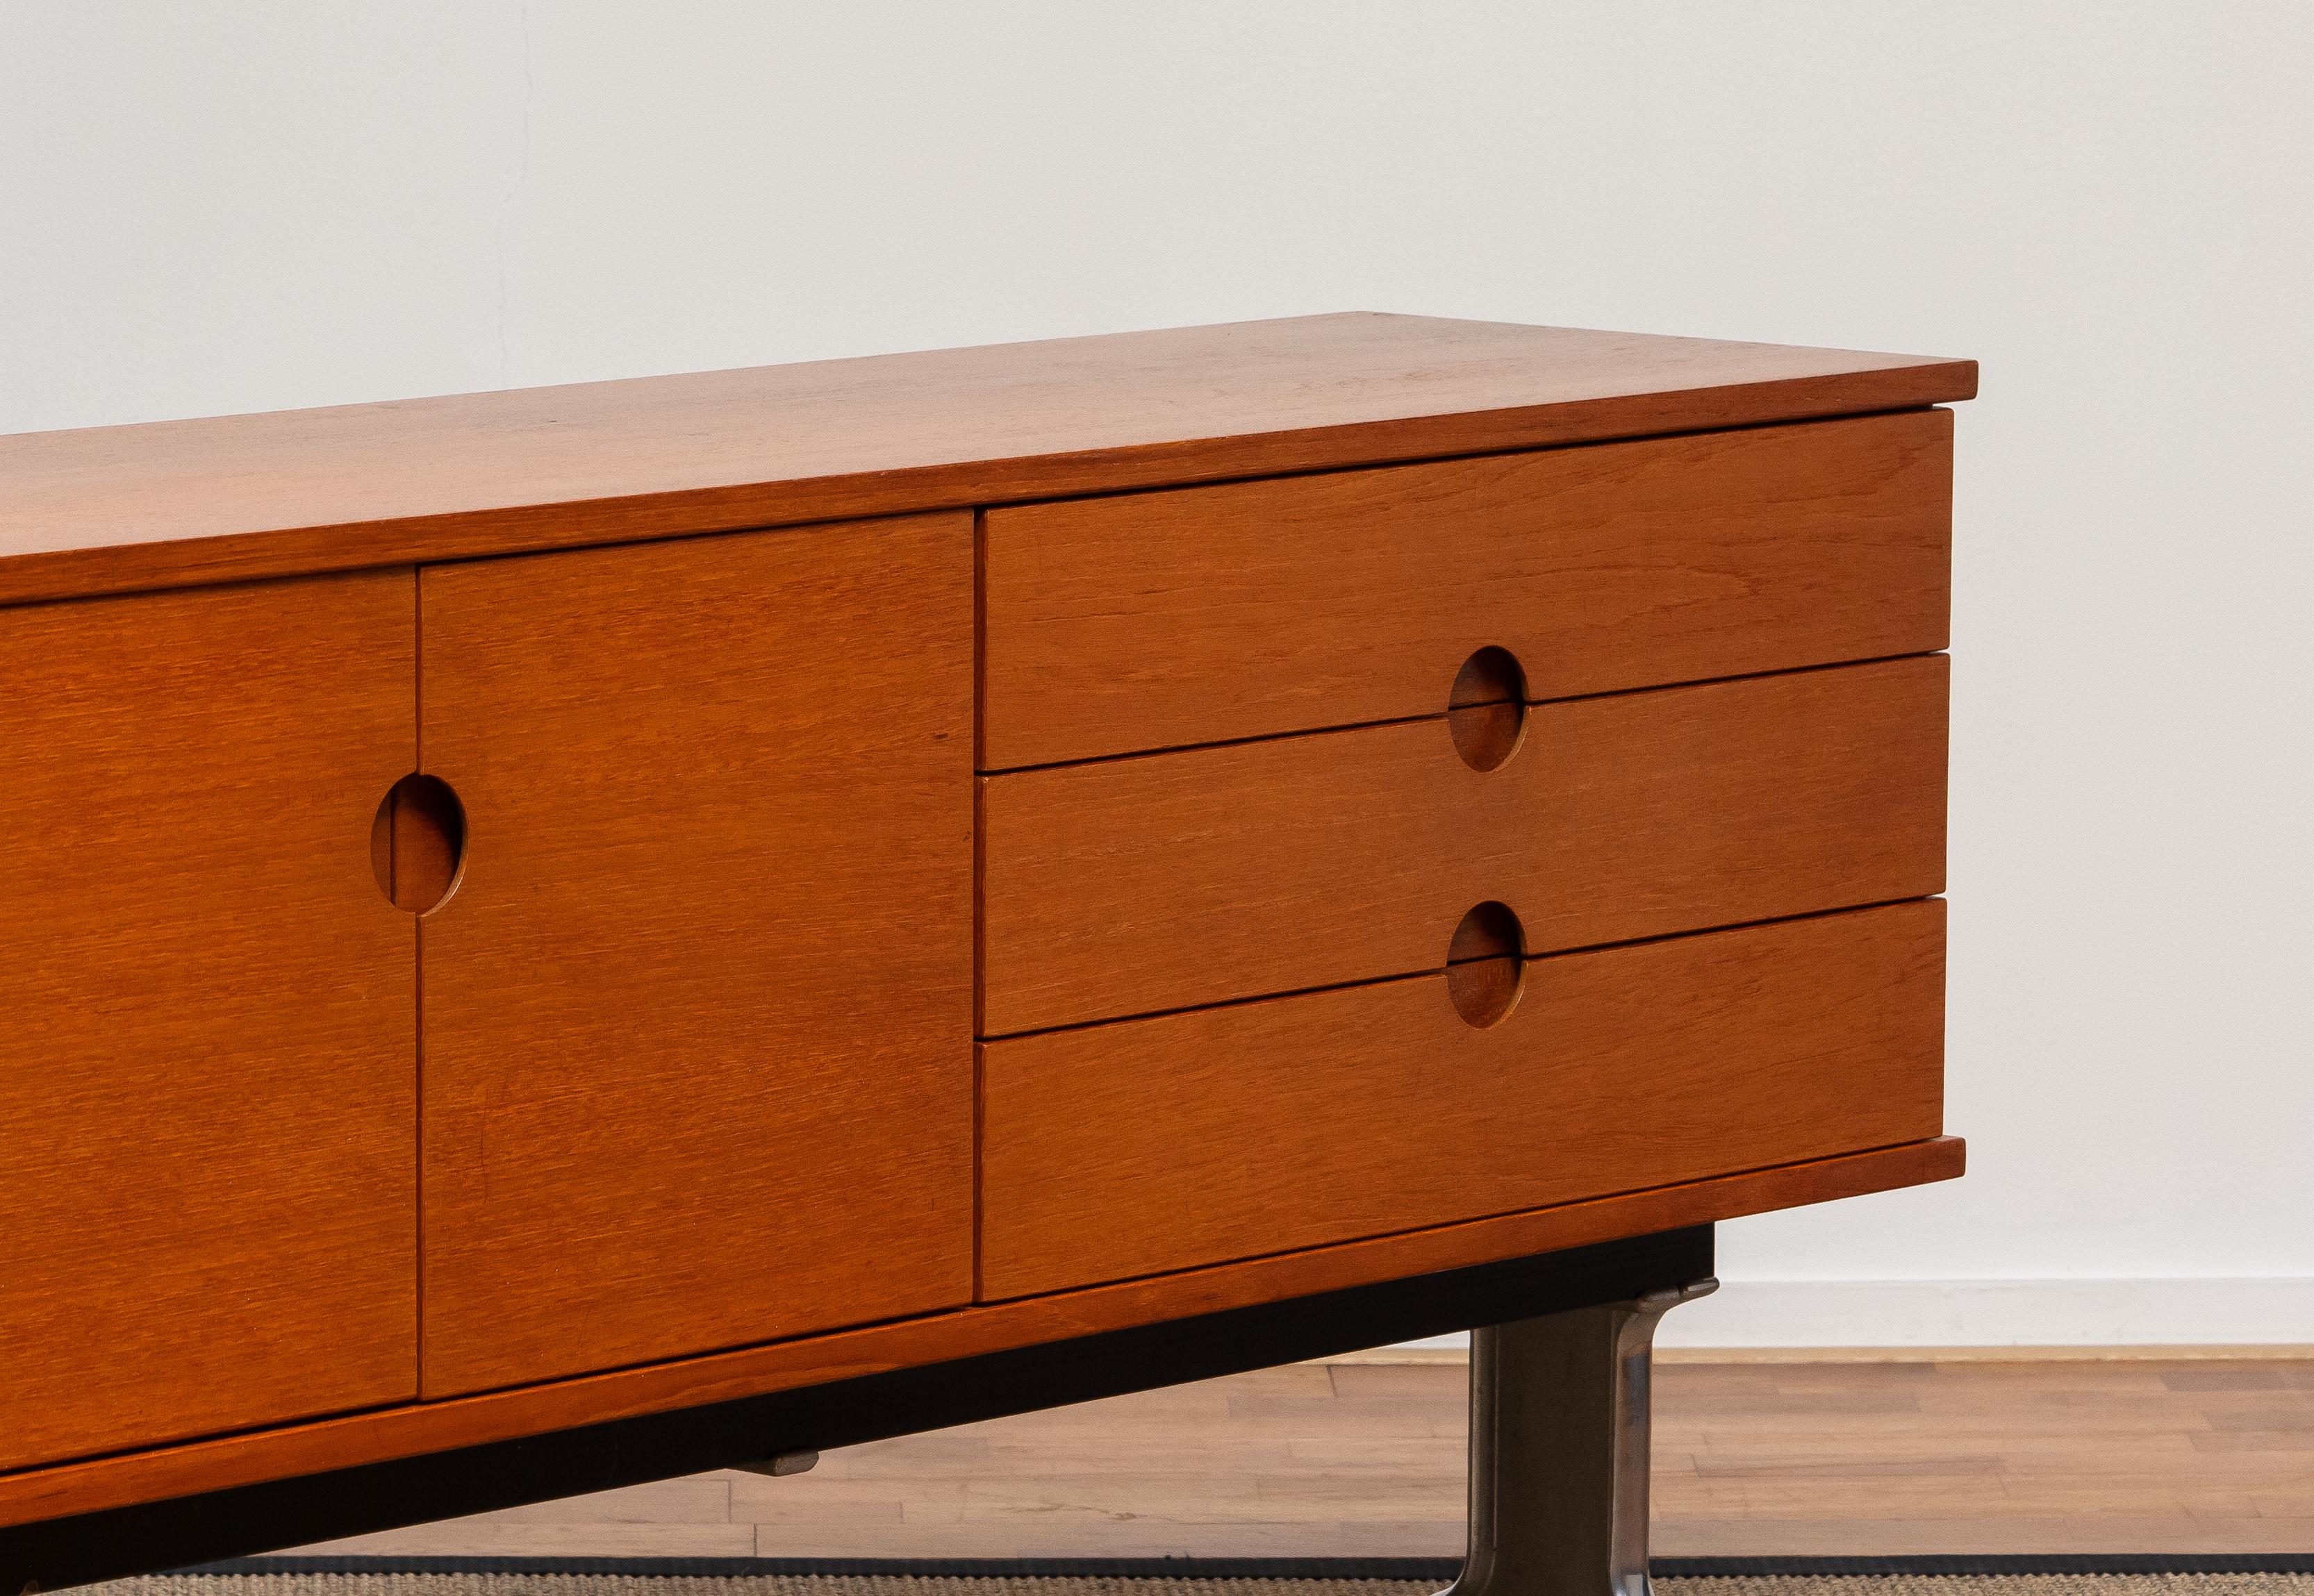 Scandinavian Modern 1960s Sideboard / Credenzas in Teak on a Aluminum Stand by Pertti Salmi, Norway